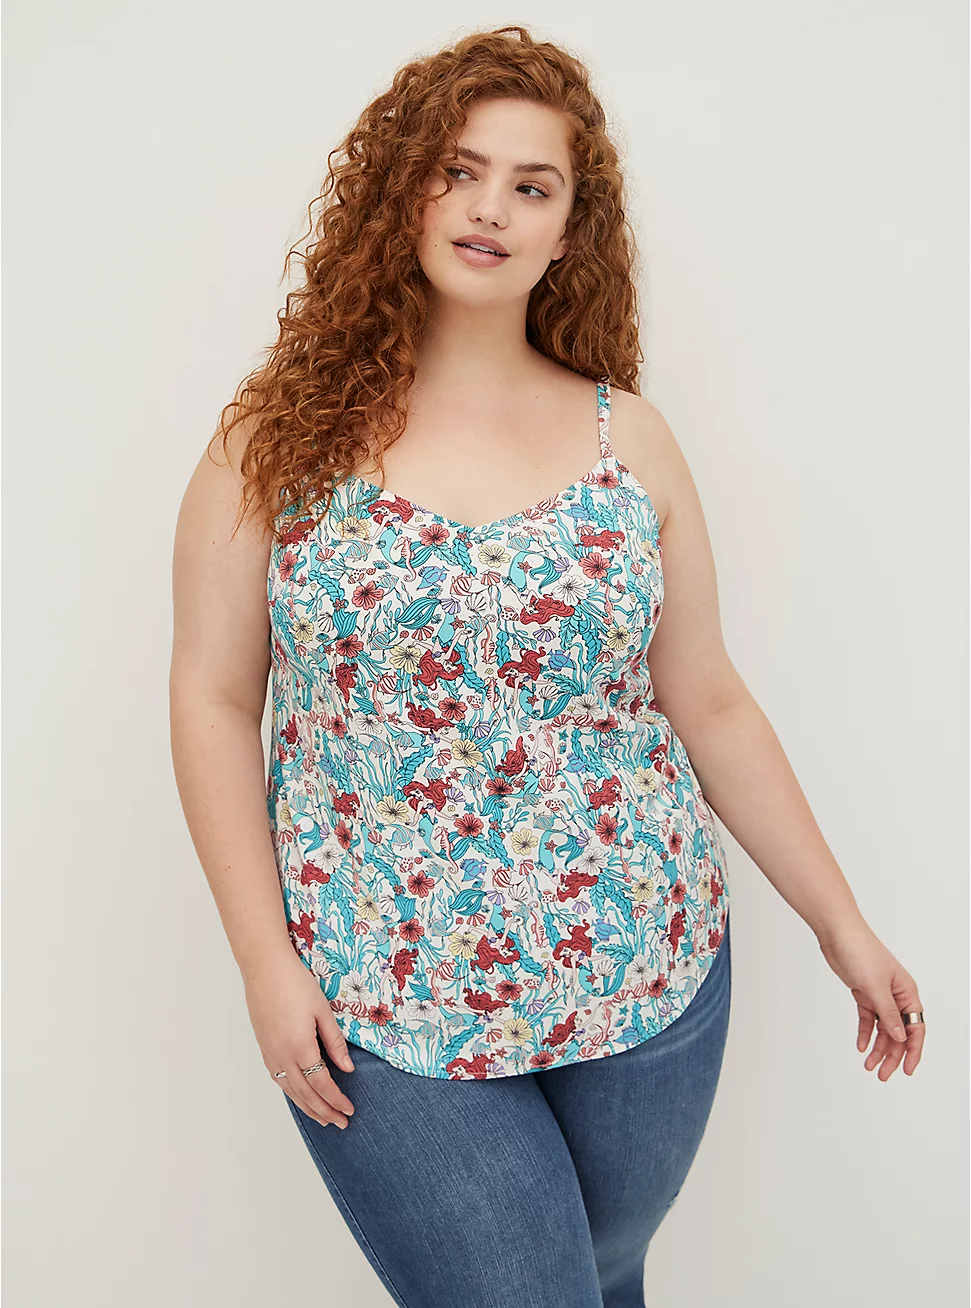 Dive Into Style With The Little Mermaid Torrid Collection - Fashion